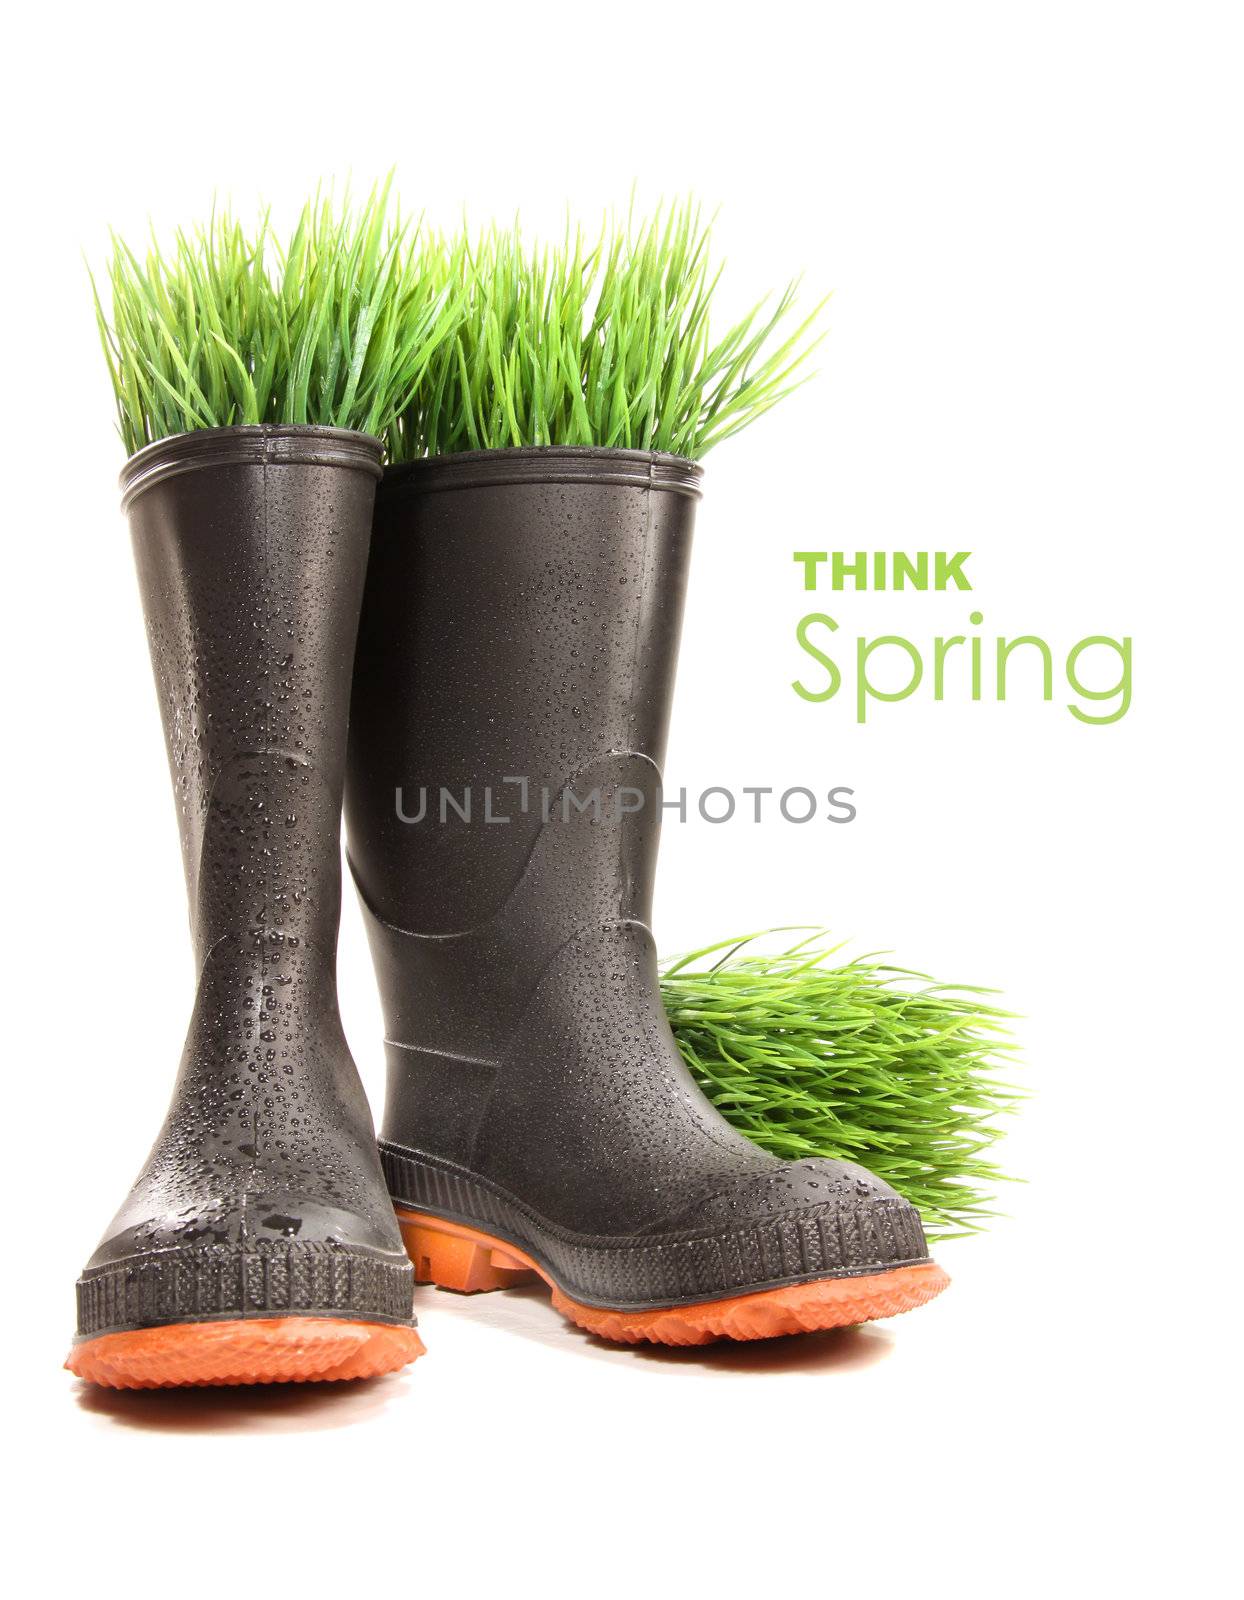 Rubber boots with grass on white background